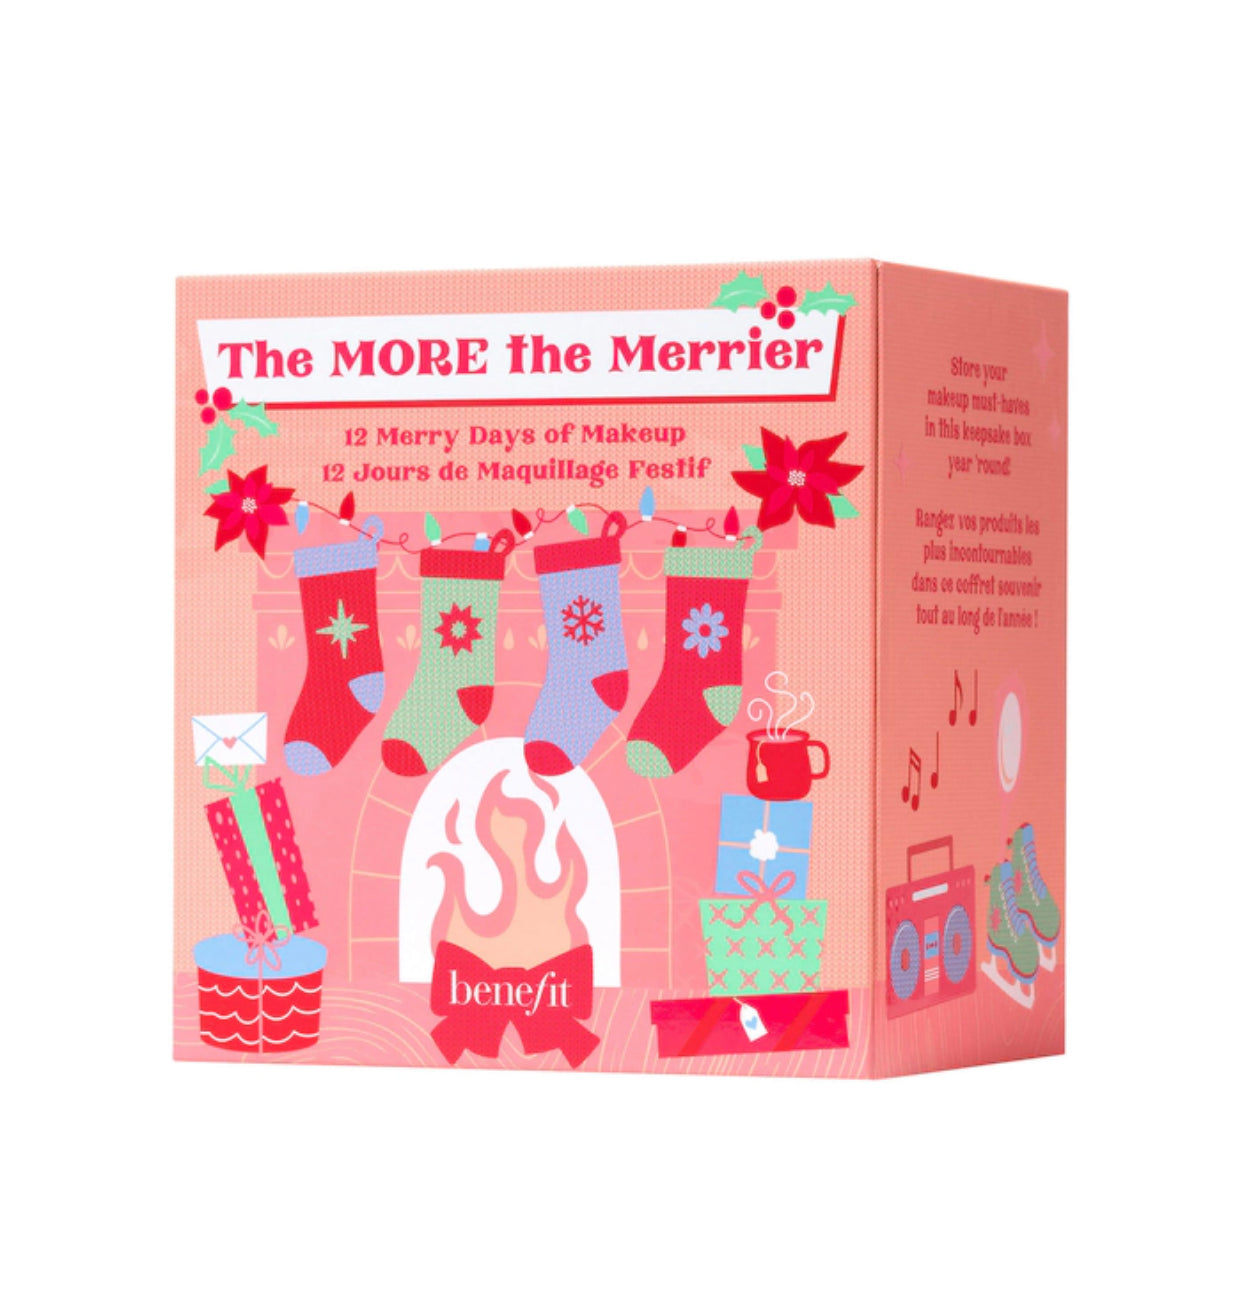 BENEFIT COSMETICS, NEW RELEASE!!! THE MORE THE MERRIER MAKEUP HOLIDAY ADVENT CALENDAR SET